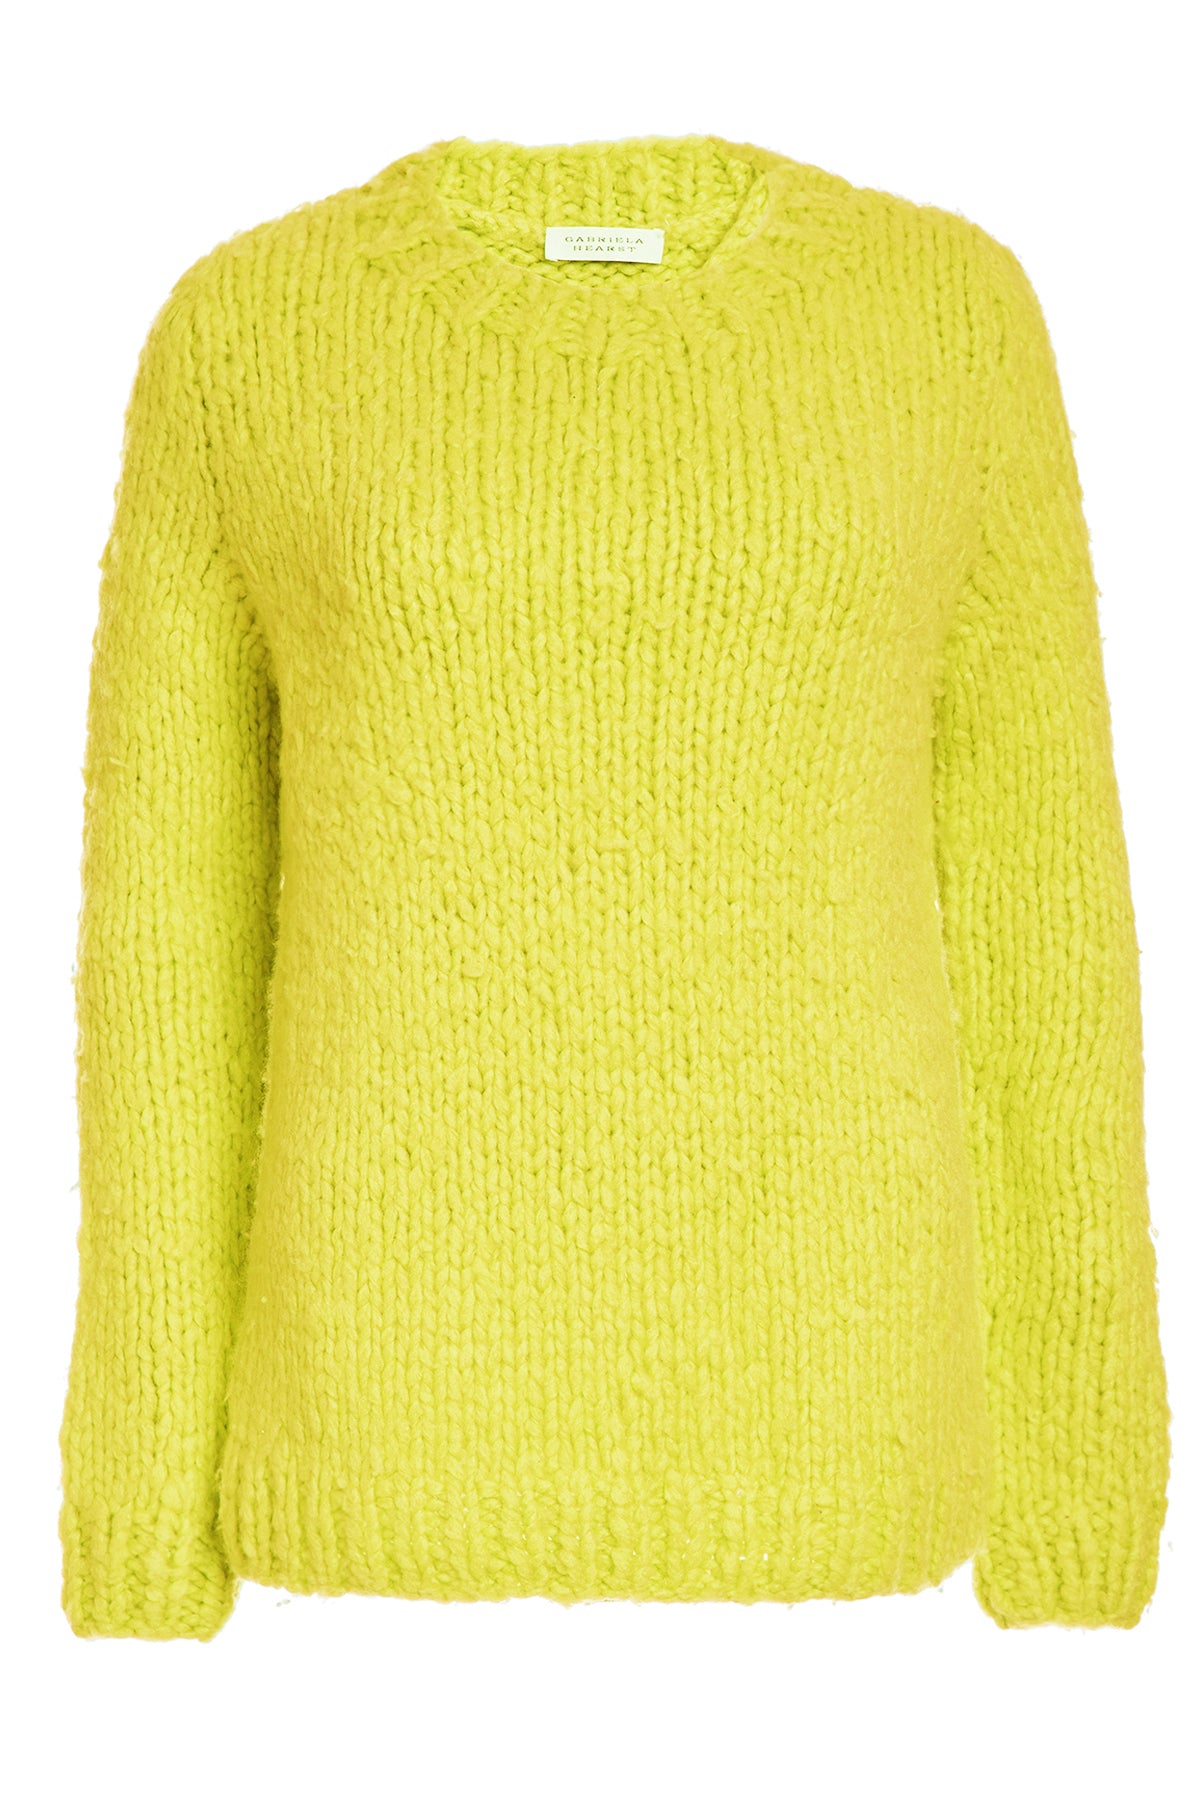 Lawrence Knit Sweater in Citrine Welfat Cashmere